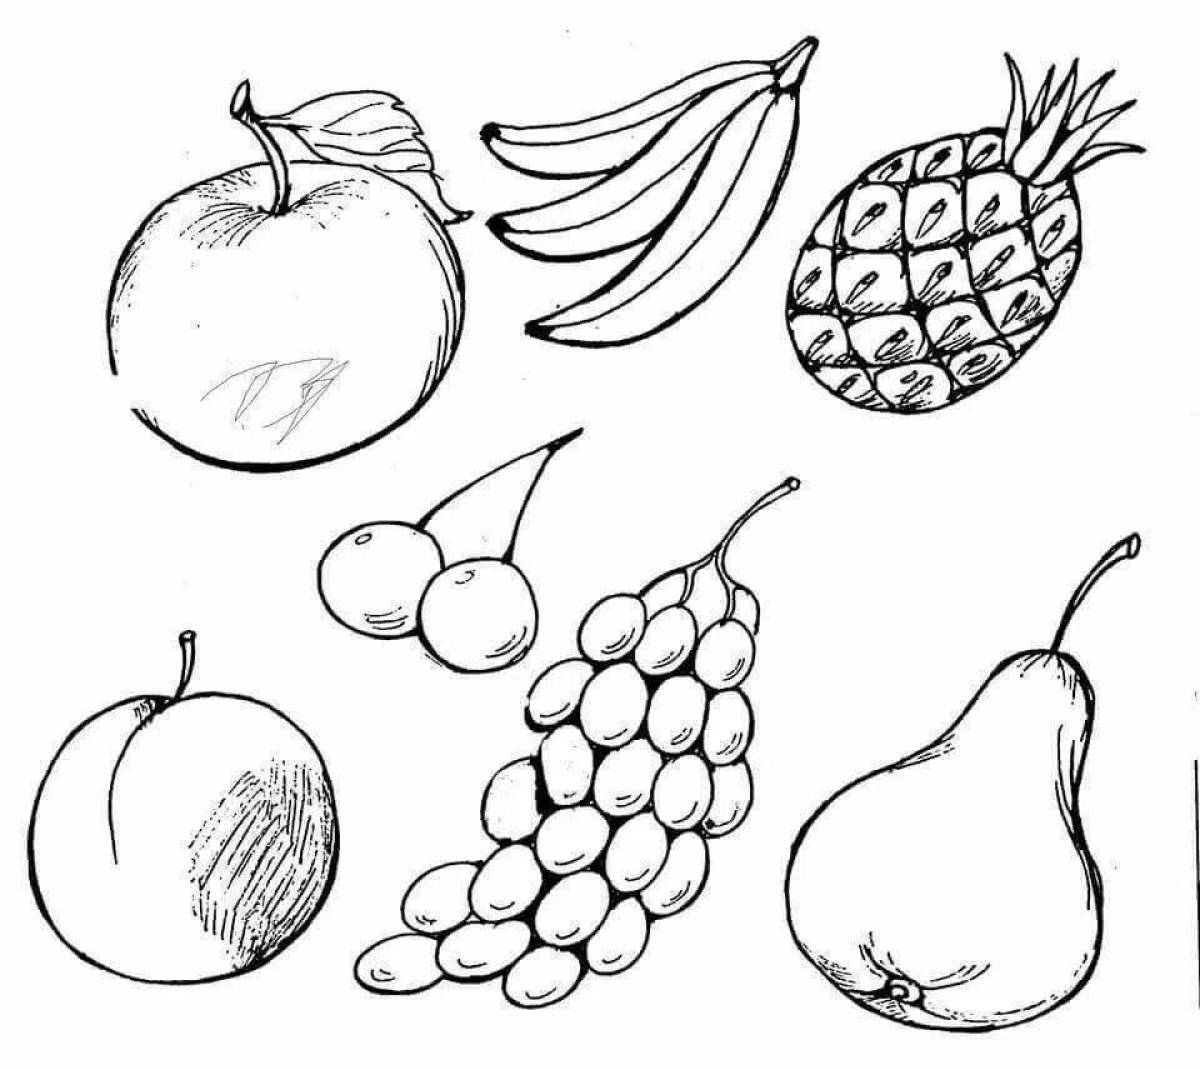 Colorful and playful fruits and vegetables coloring book